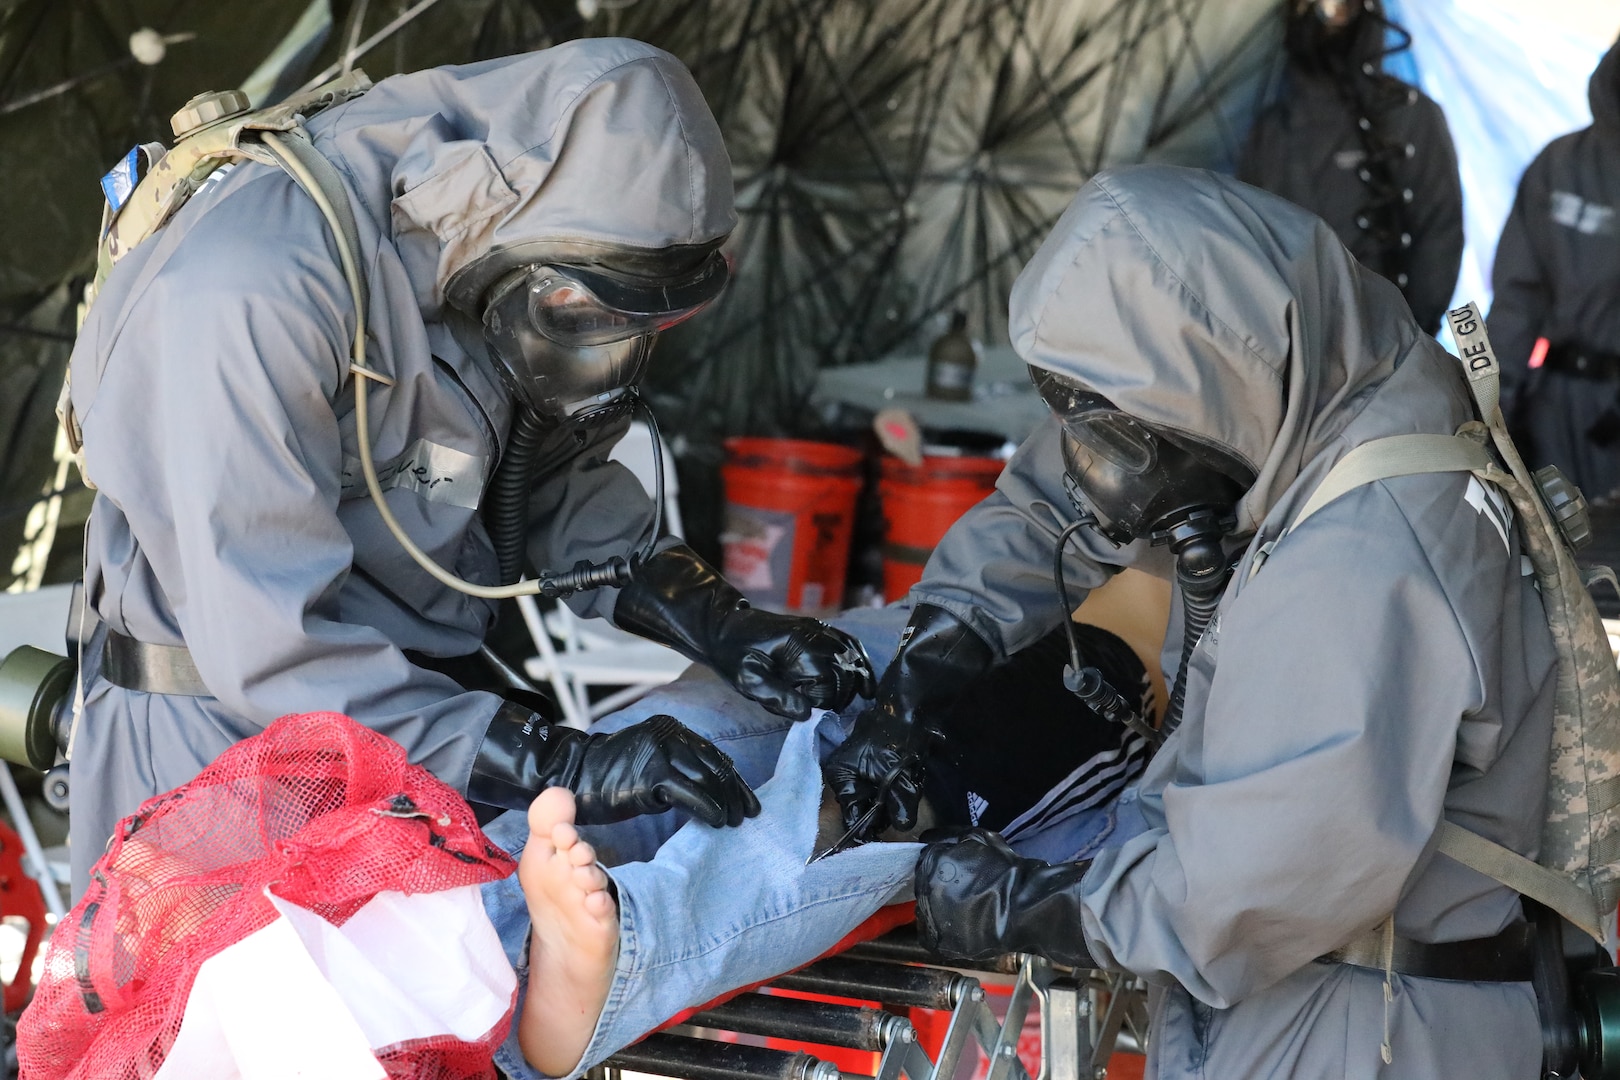 U.S. Army Soldiers of the 66th Military Police Company conduct simulated, urban search and rescue operations in an area with chemical, biological, radiological or nuclear contamination during Guardian Response 19 at Muscatacuck Urban Training Center, Ind., May 5, 2019. Civilian role players acted as inhabitants of the local area, and provided the soldiers with realistic, real world training during the decontamination procedures. (U.S. Army Reserve photos by Sgt. Philip Scaringi/released)